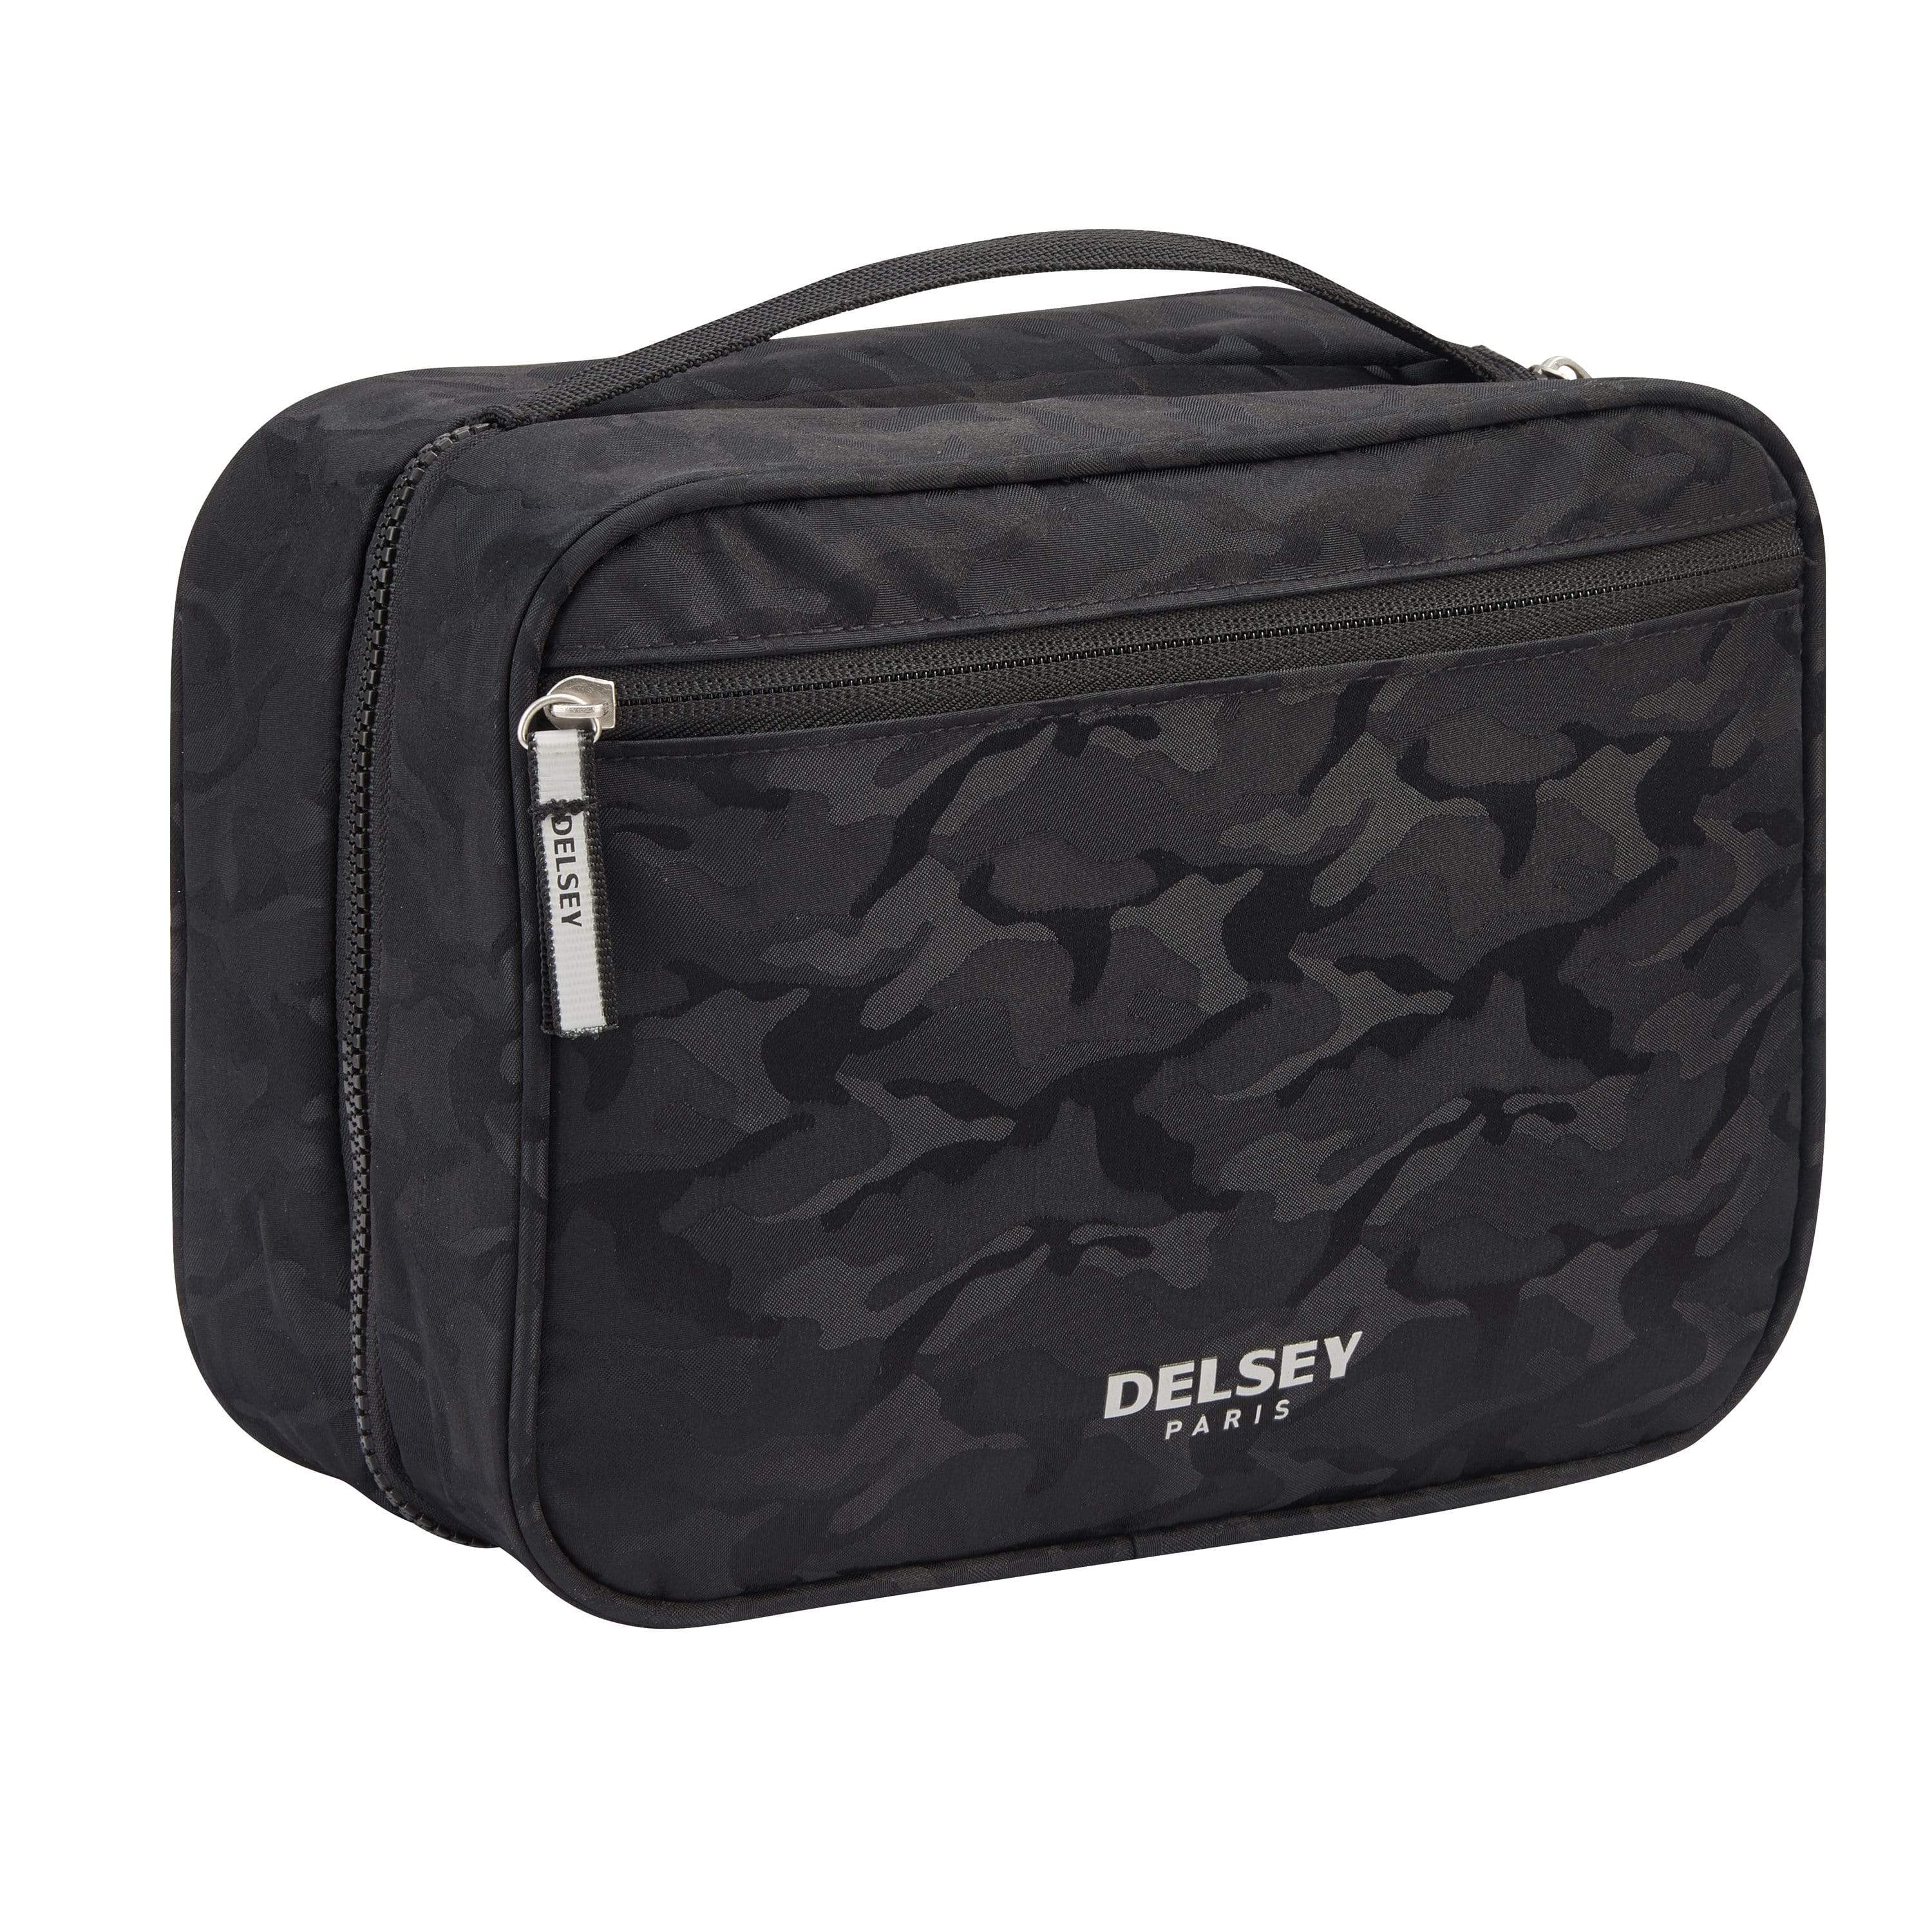 DELSEY ACCESSORY 2.0 - BLACK